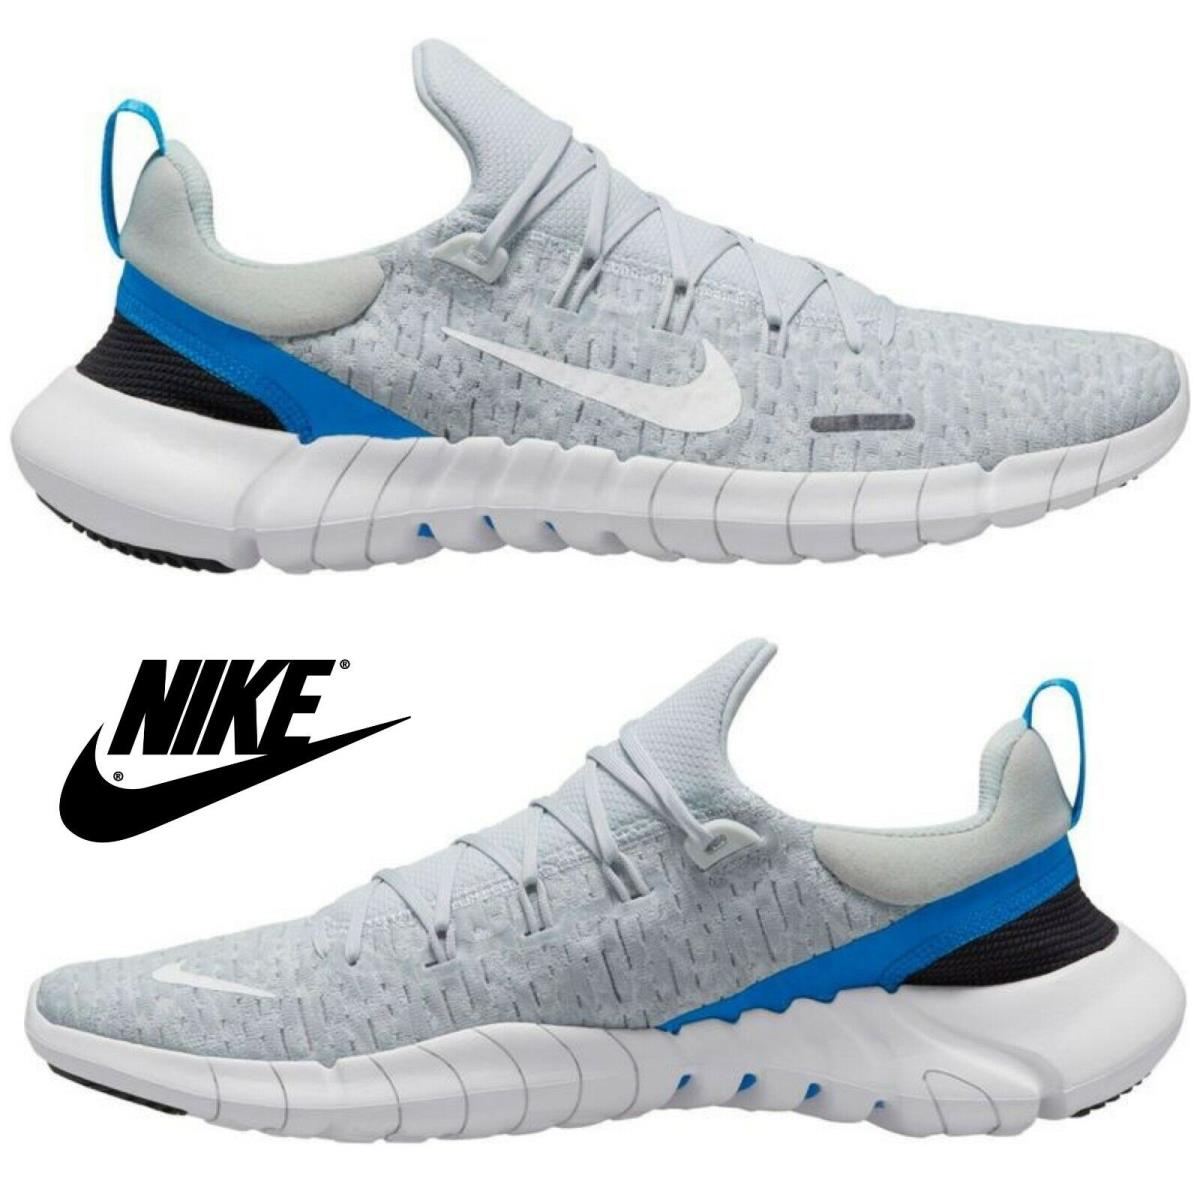 Nike Men`s Free Run 5.0 Running Shoes Training Athletic Sport Casual Sneakers